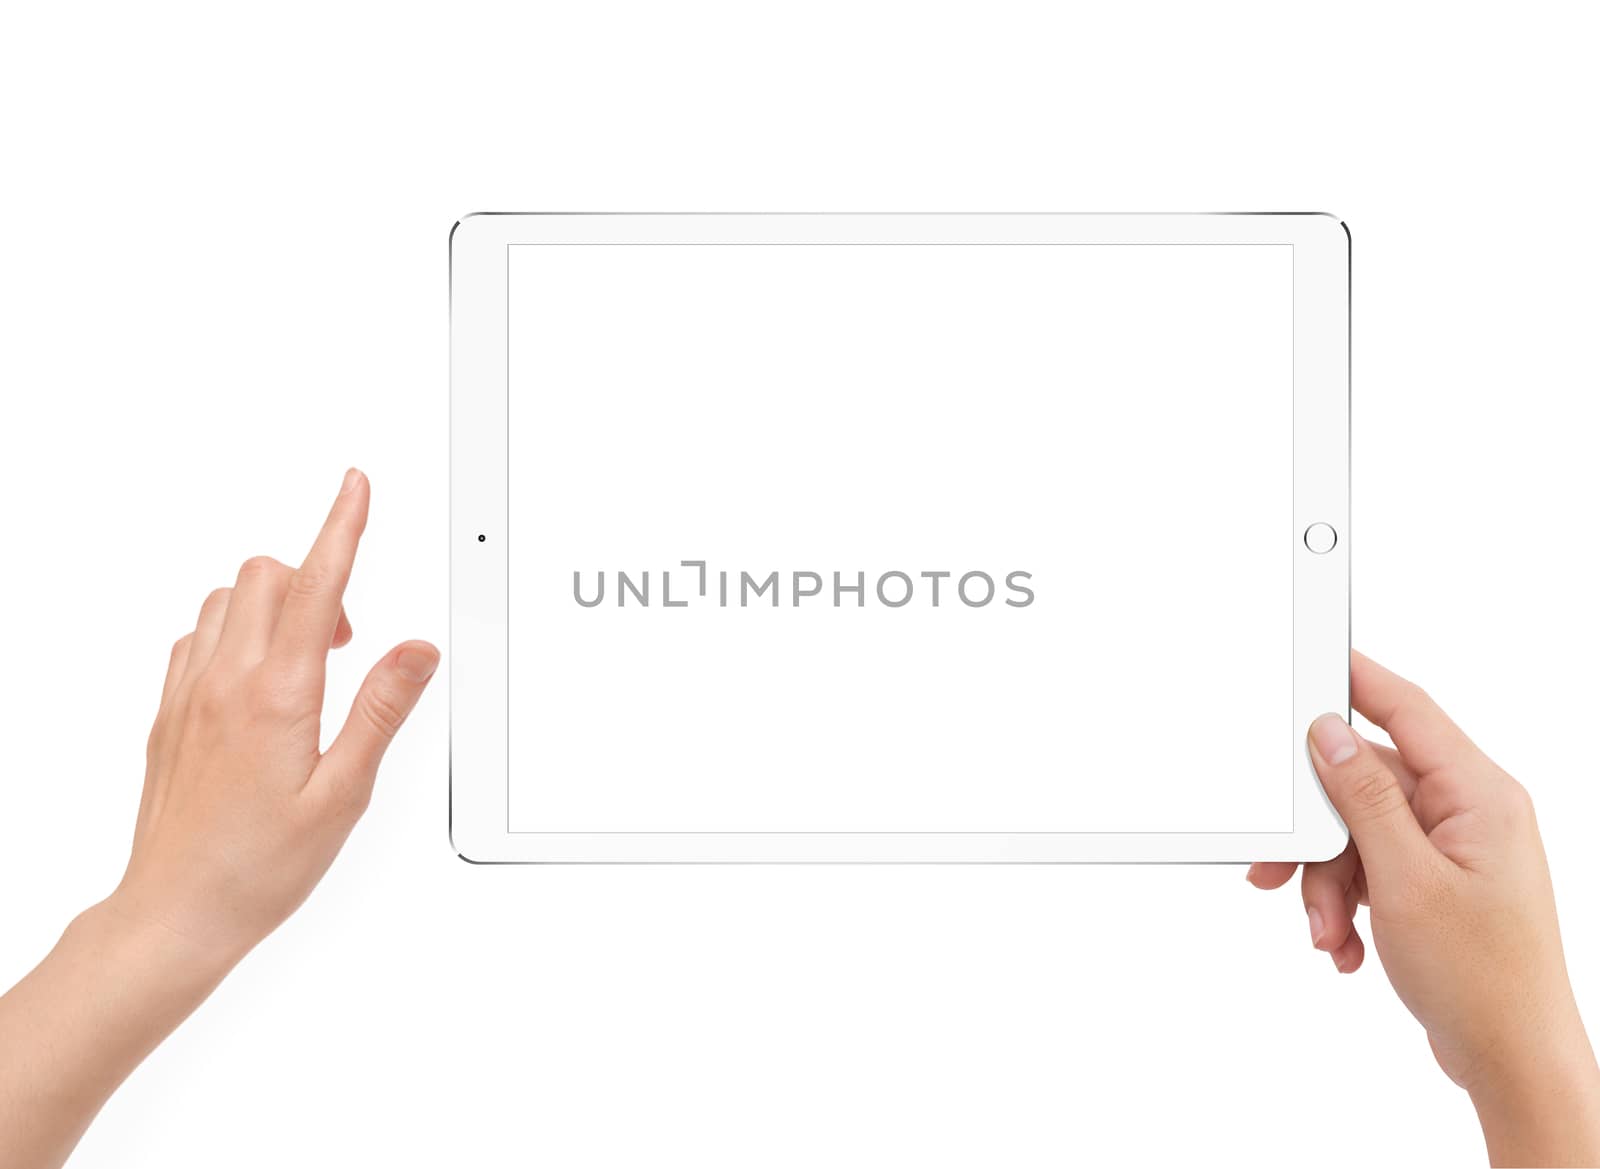 Isolated human right hand holding white tablet computer white screen mockup on white background